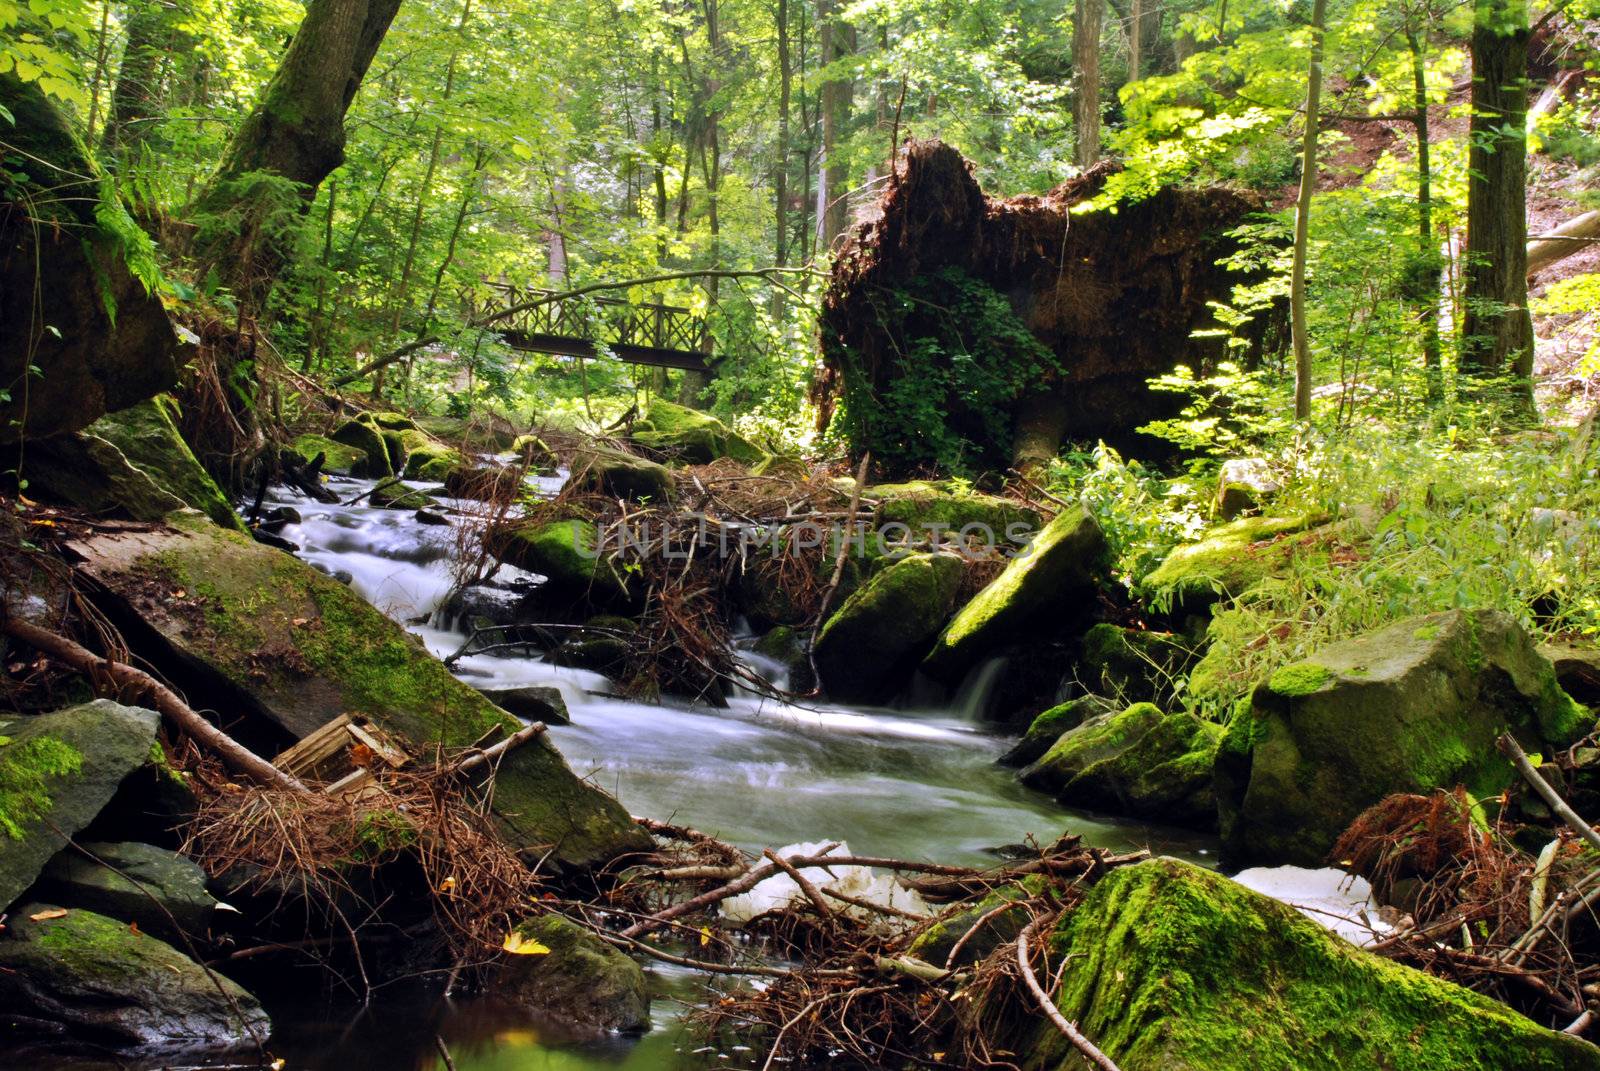 Mountain creek in the forest with long exposure